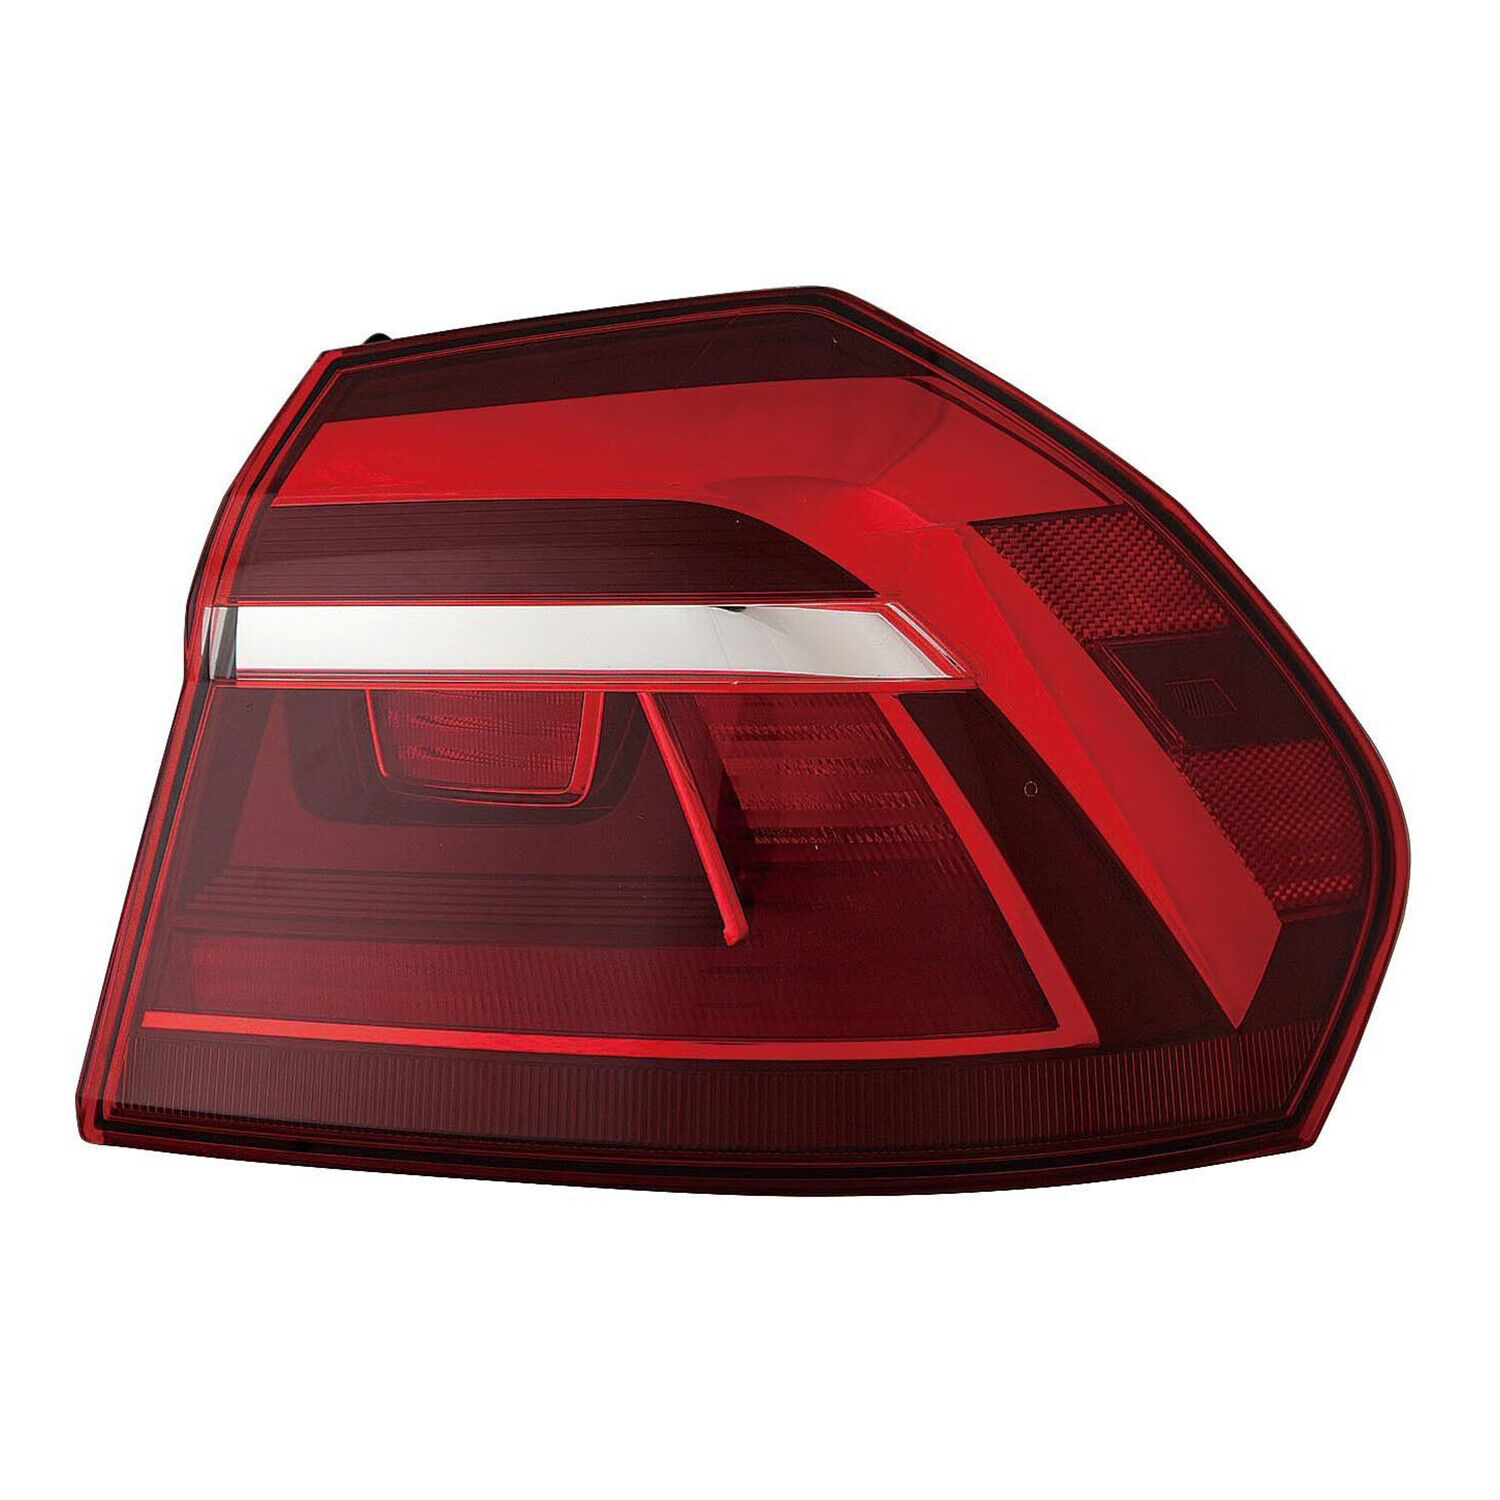 Right Smoked Tail Light For 17-19 Volkswagen Passat Production From 7-4-16; CAPA